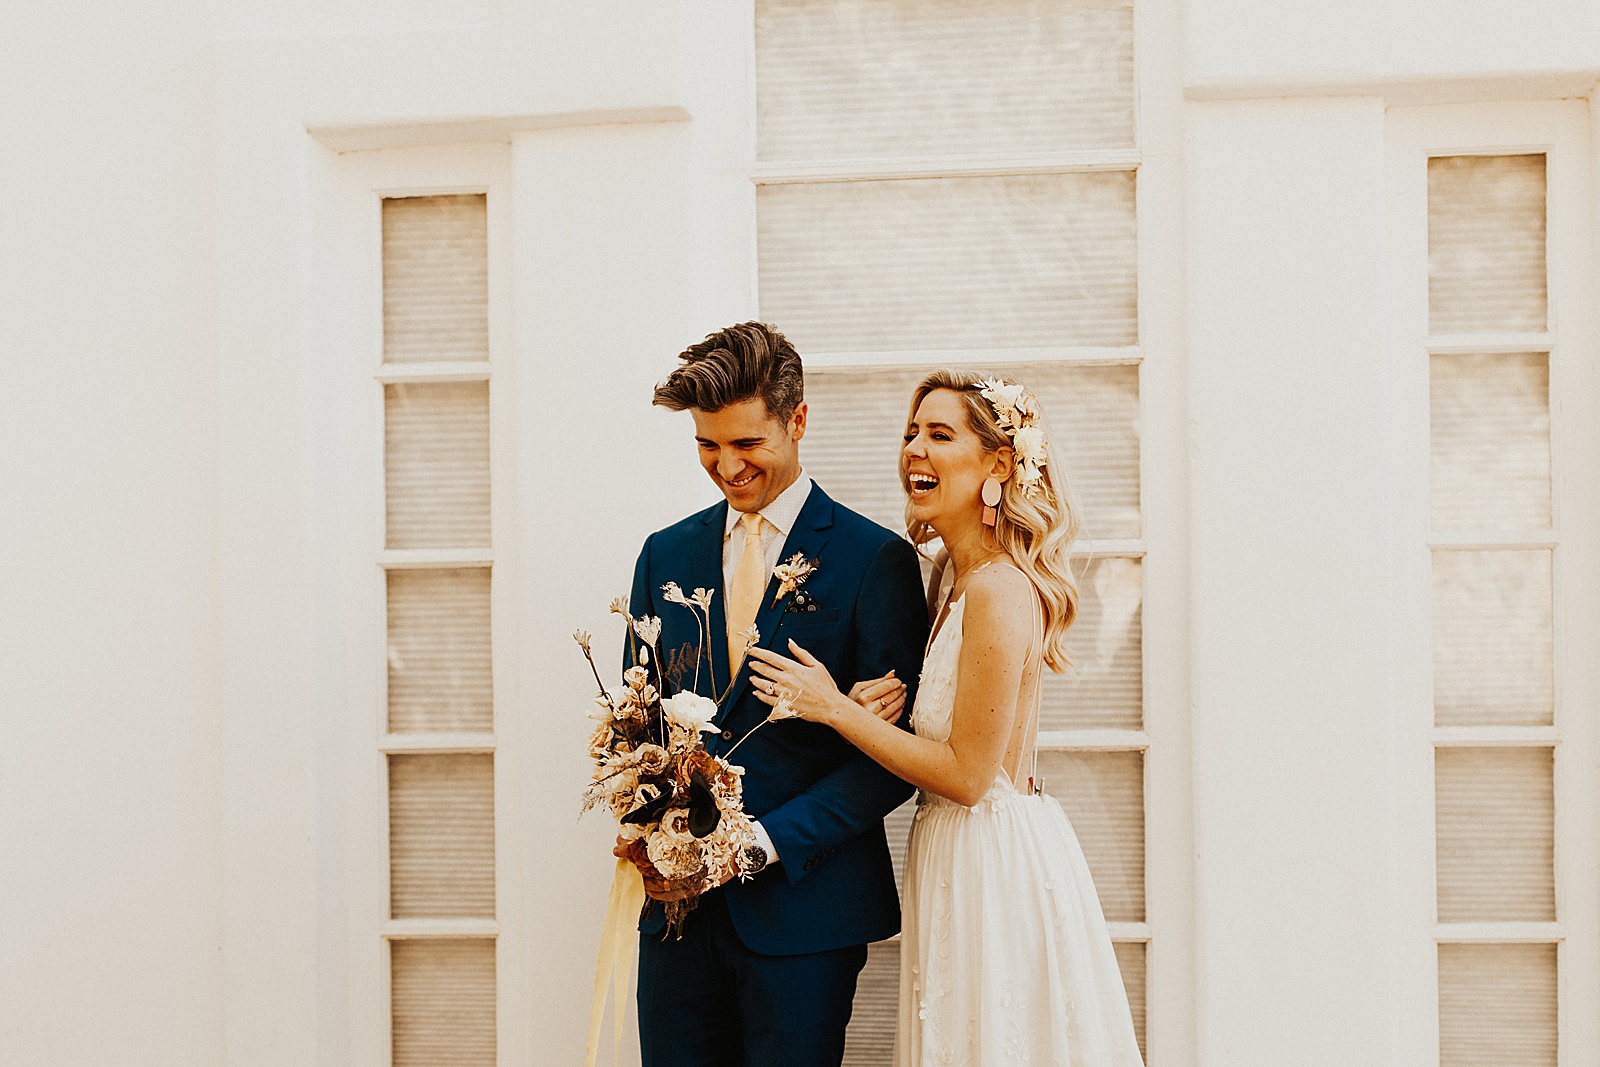 This boho Palm Springs wedding will give you all the bright and joyful vibes!